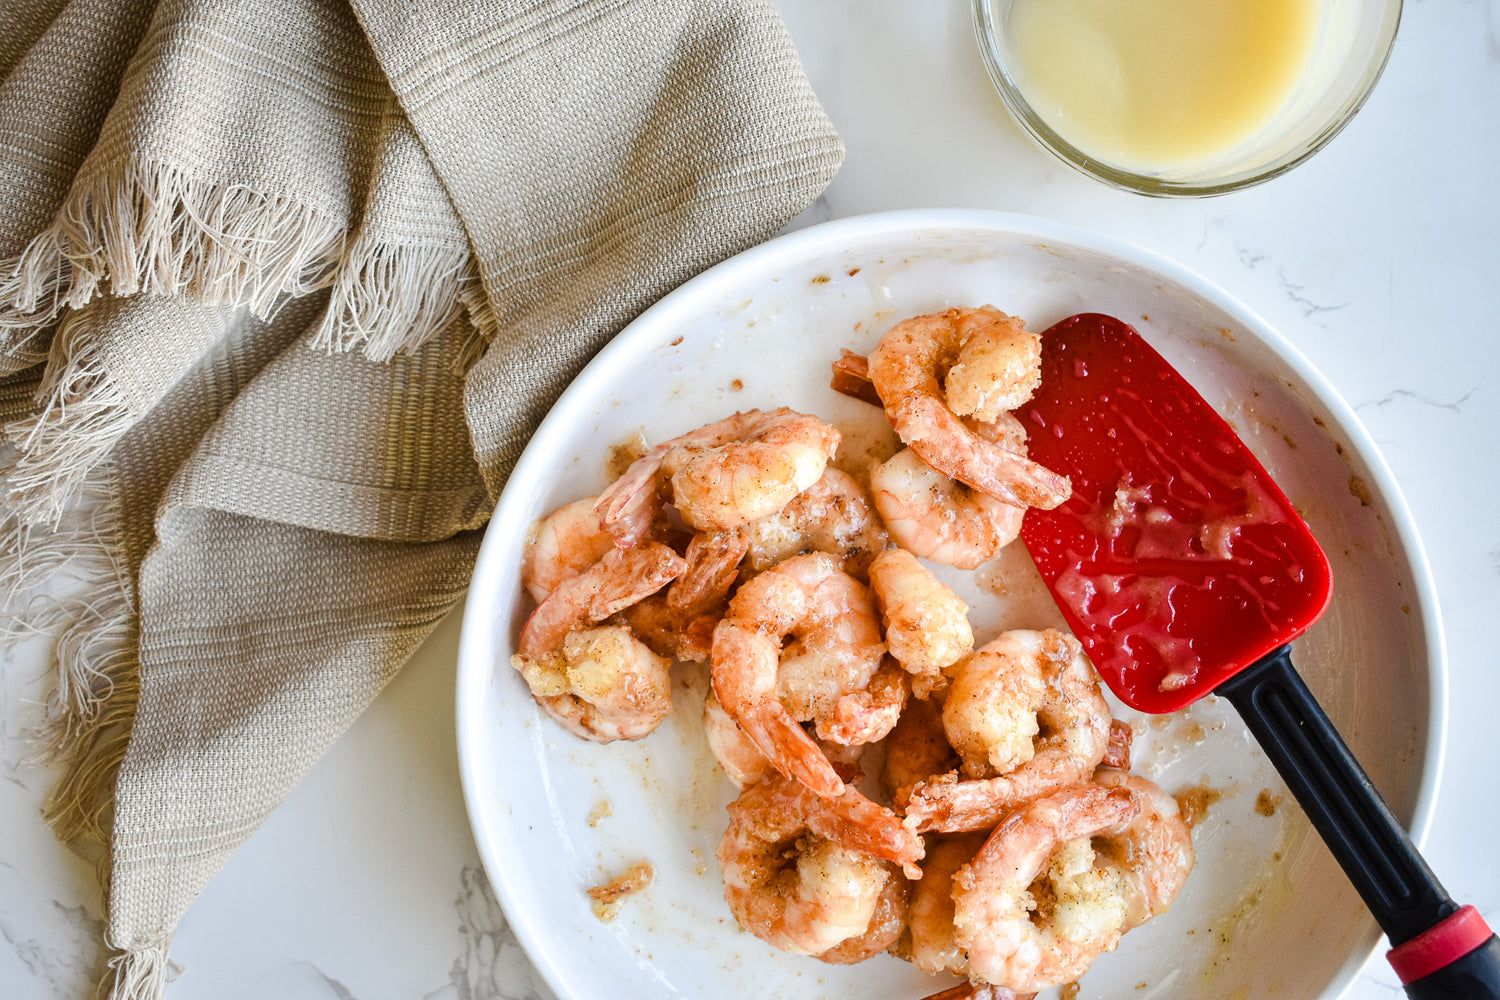 The honey shrimp tossed in the sauce.